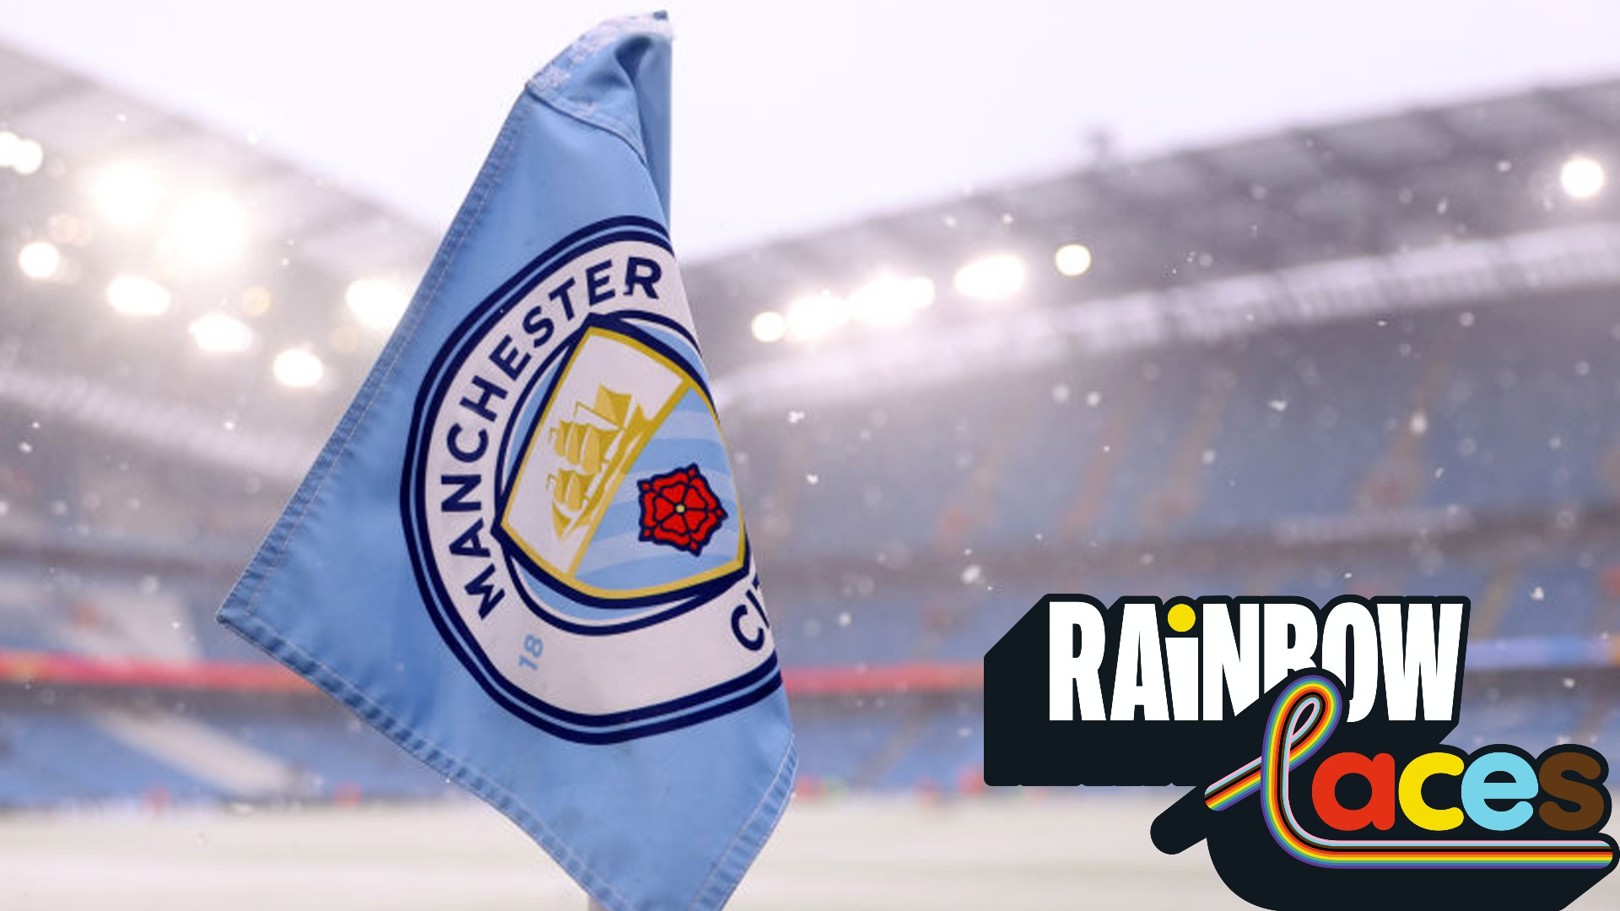 How Manchester City are celebrating the Rainbow Laces campaign